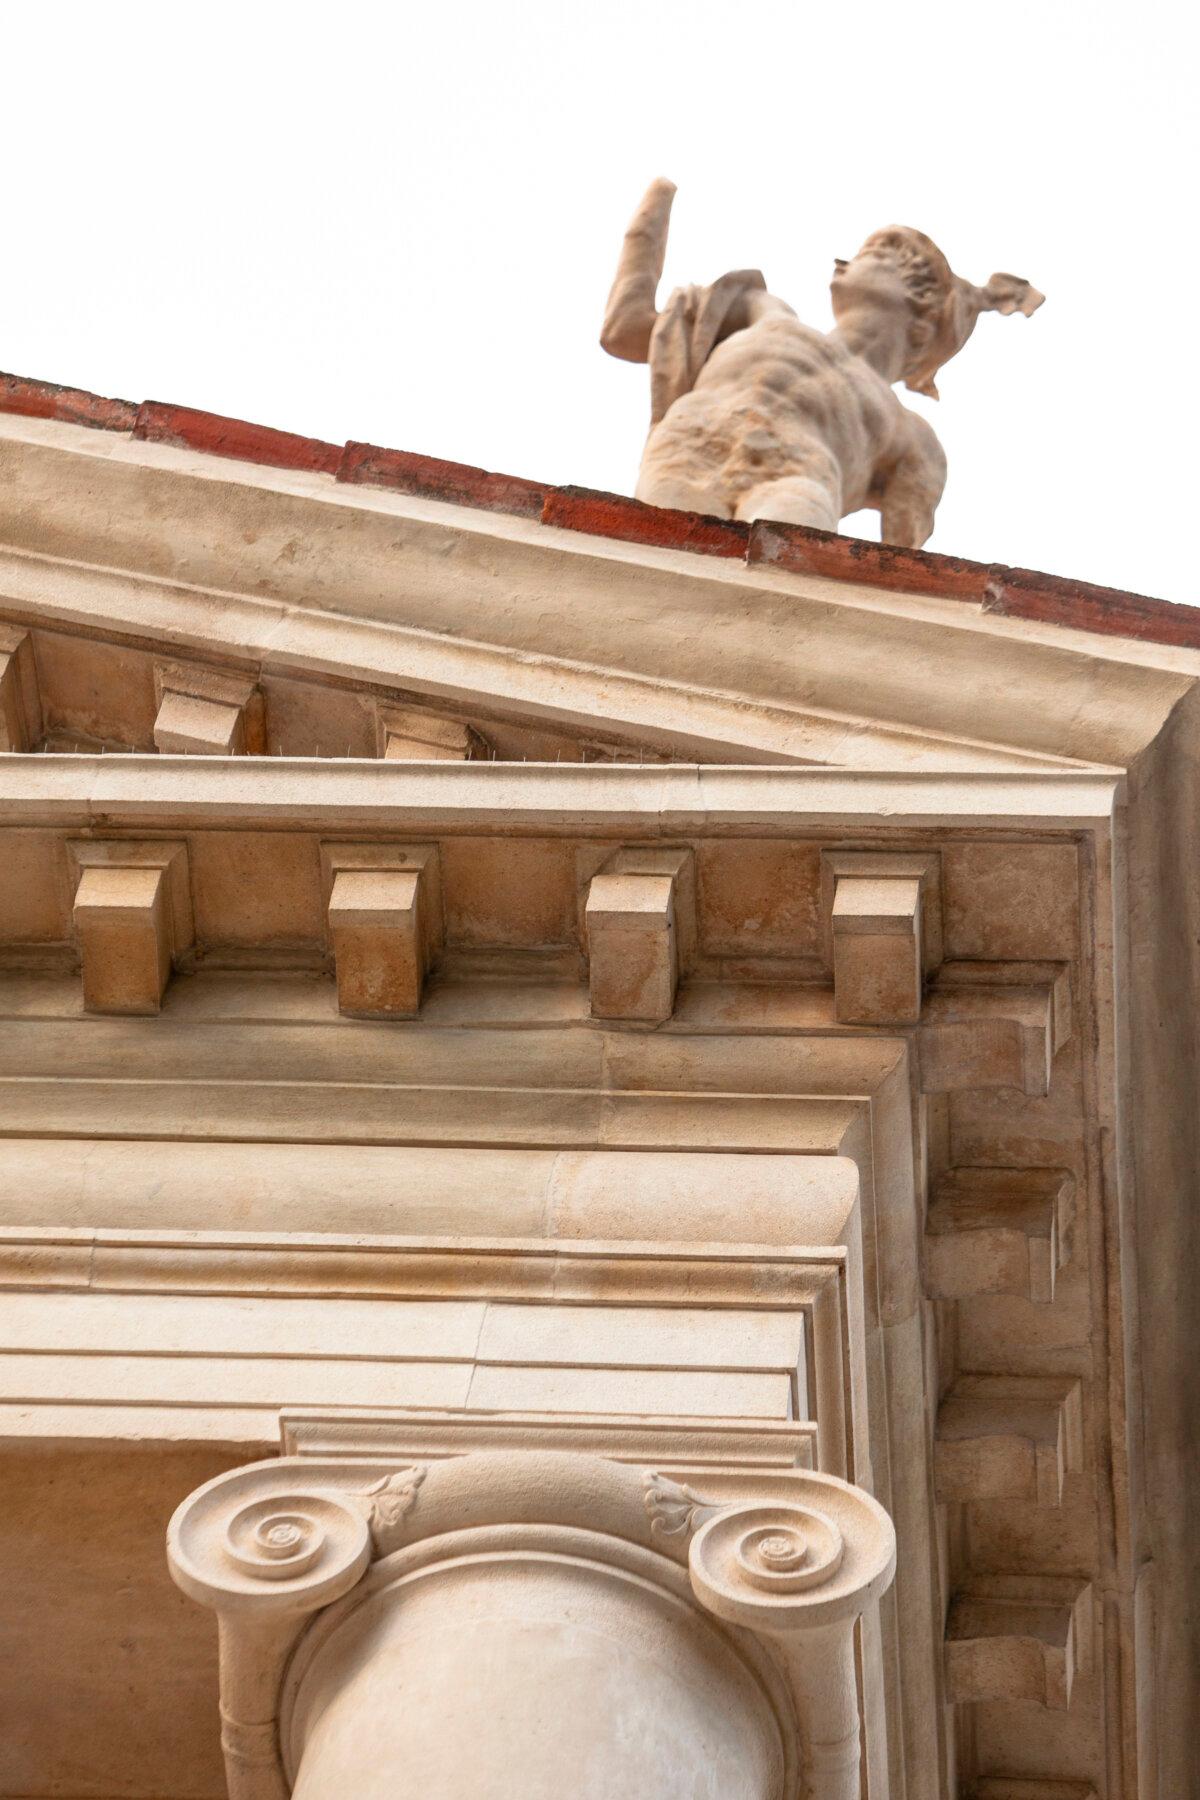 The finely carved Ionic stone scrolls have a gentle quality and are emphasized when juxtaposed with the otherwise plain entablature (horizontal band above the columns) and the repetition of corbels (rectangular boxes) above. A classical sculpture stands up top. (J.H. Smith)